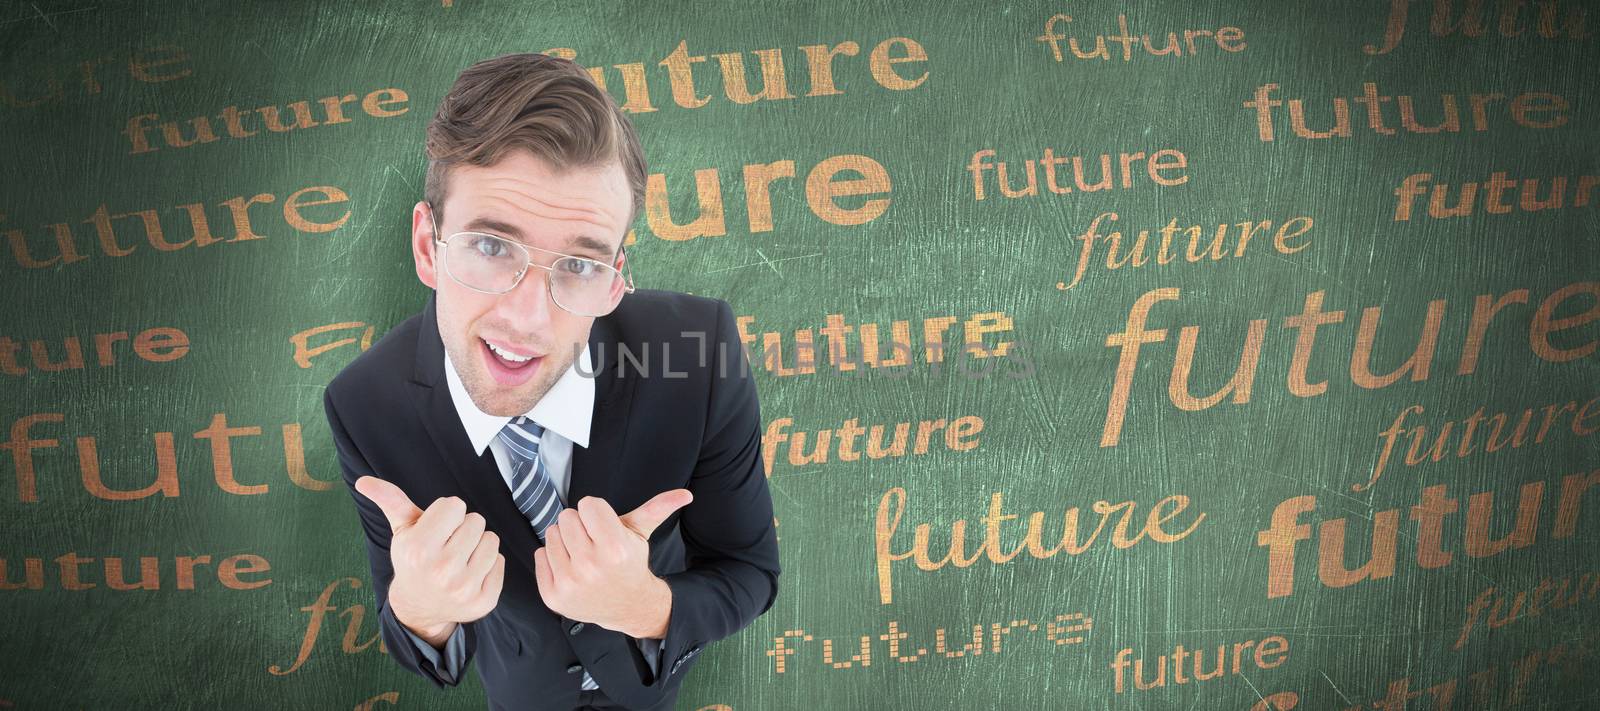 Geeky businessman with thumbs up  against green chalkboard